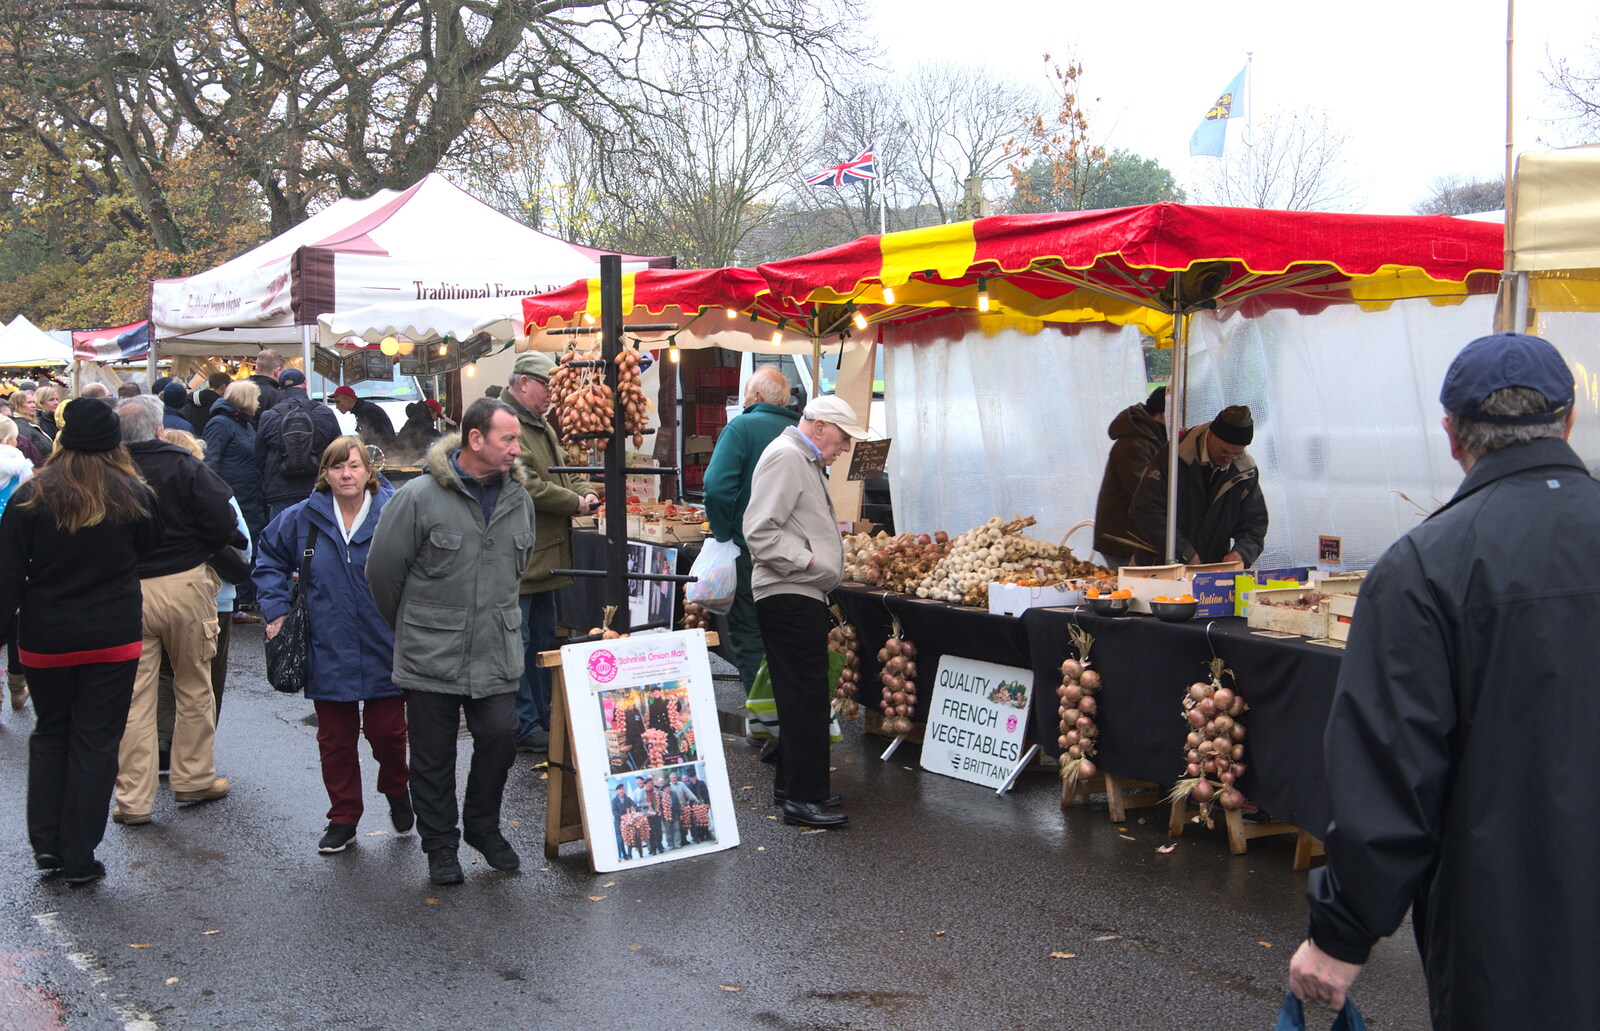 Onions on Ashley Road from A Christmas Market, New Milton, Hampshire - 24th November 2018